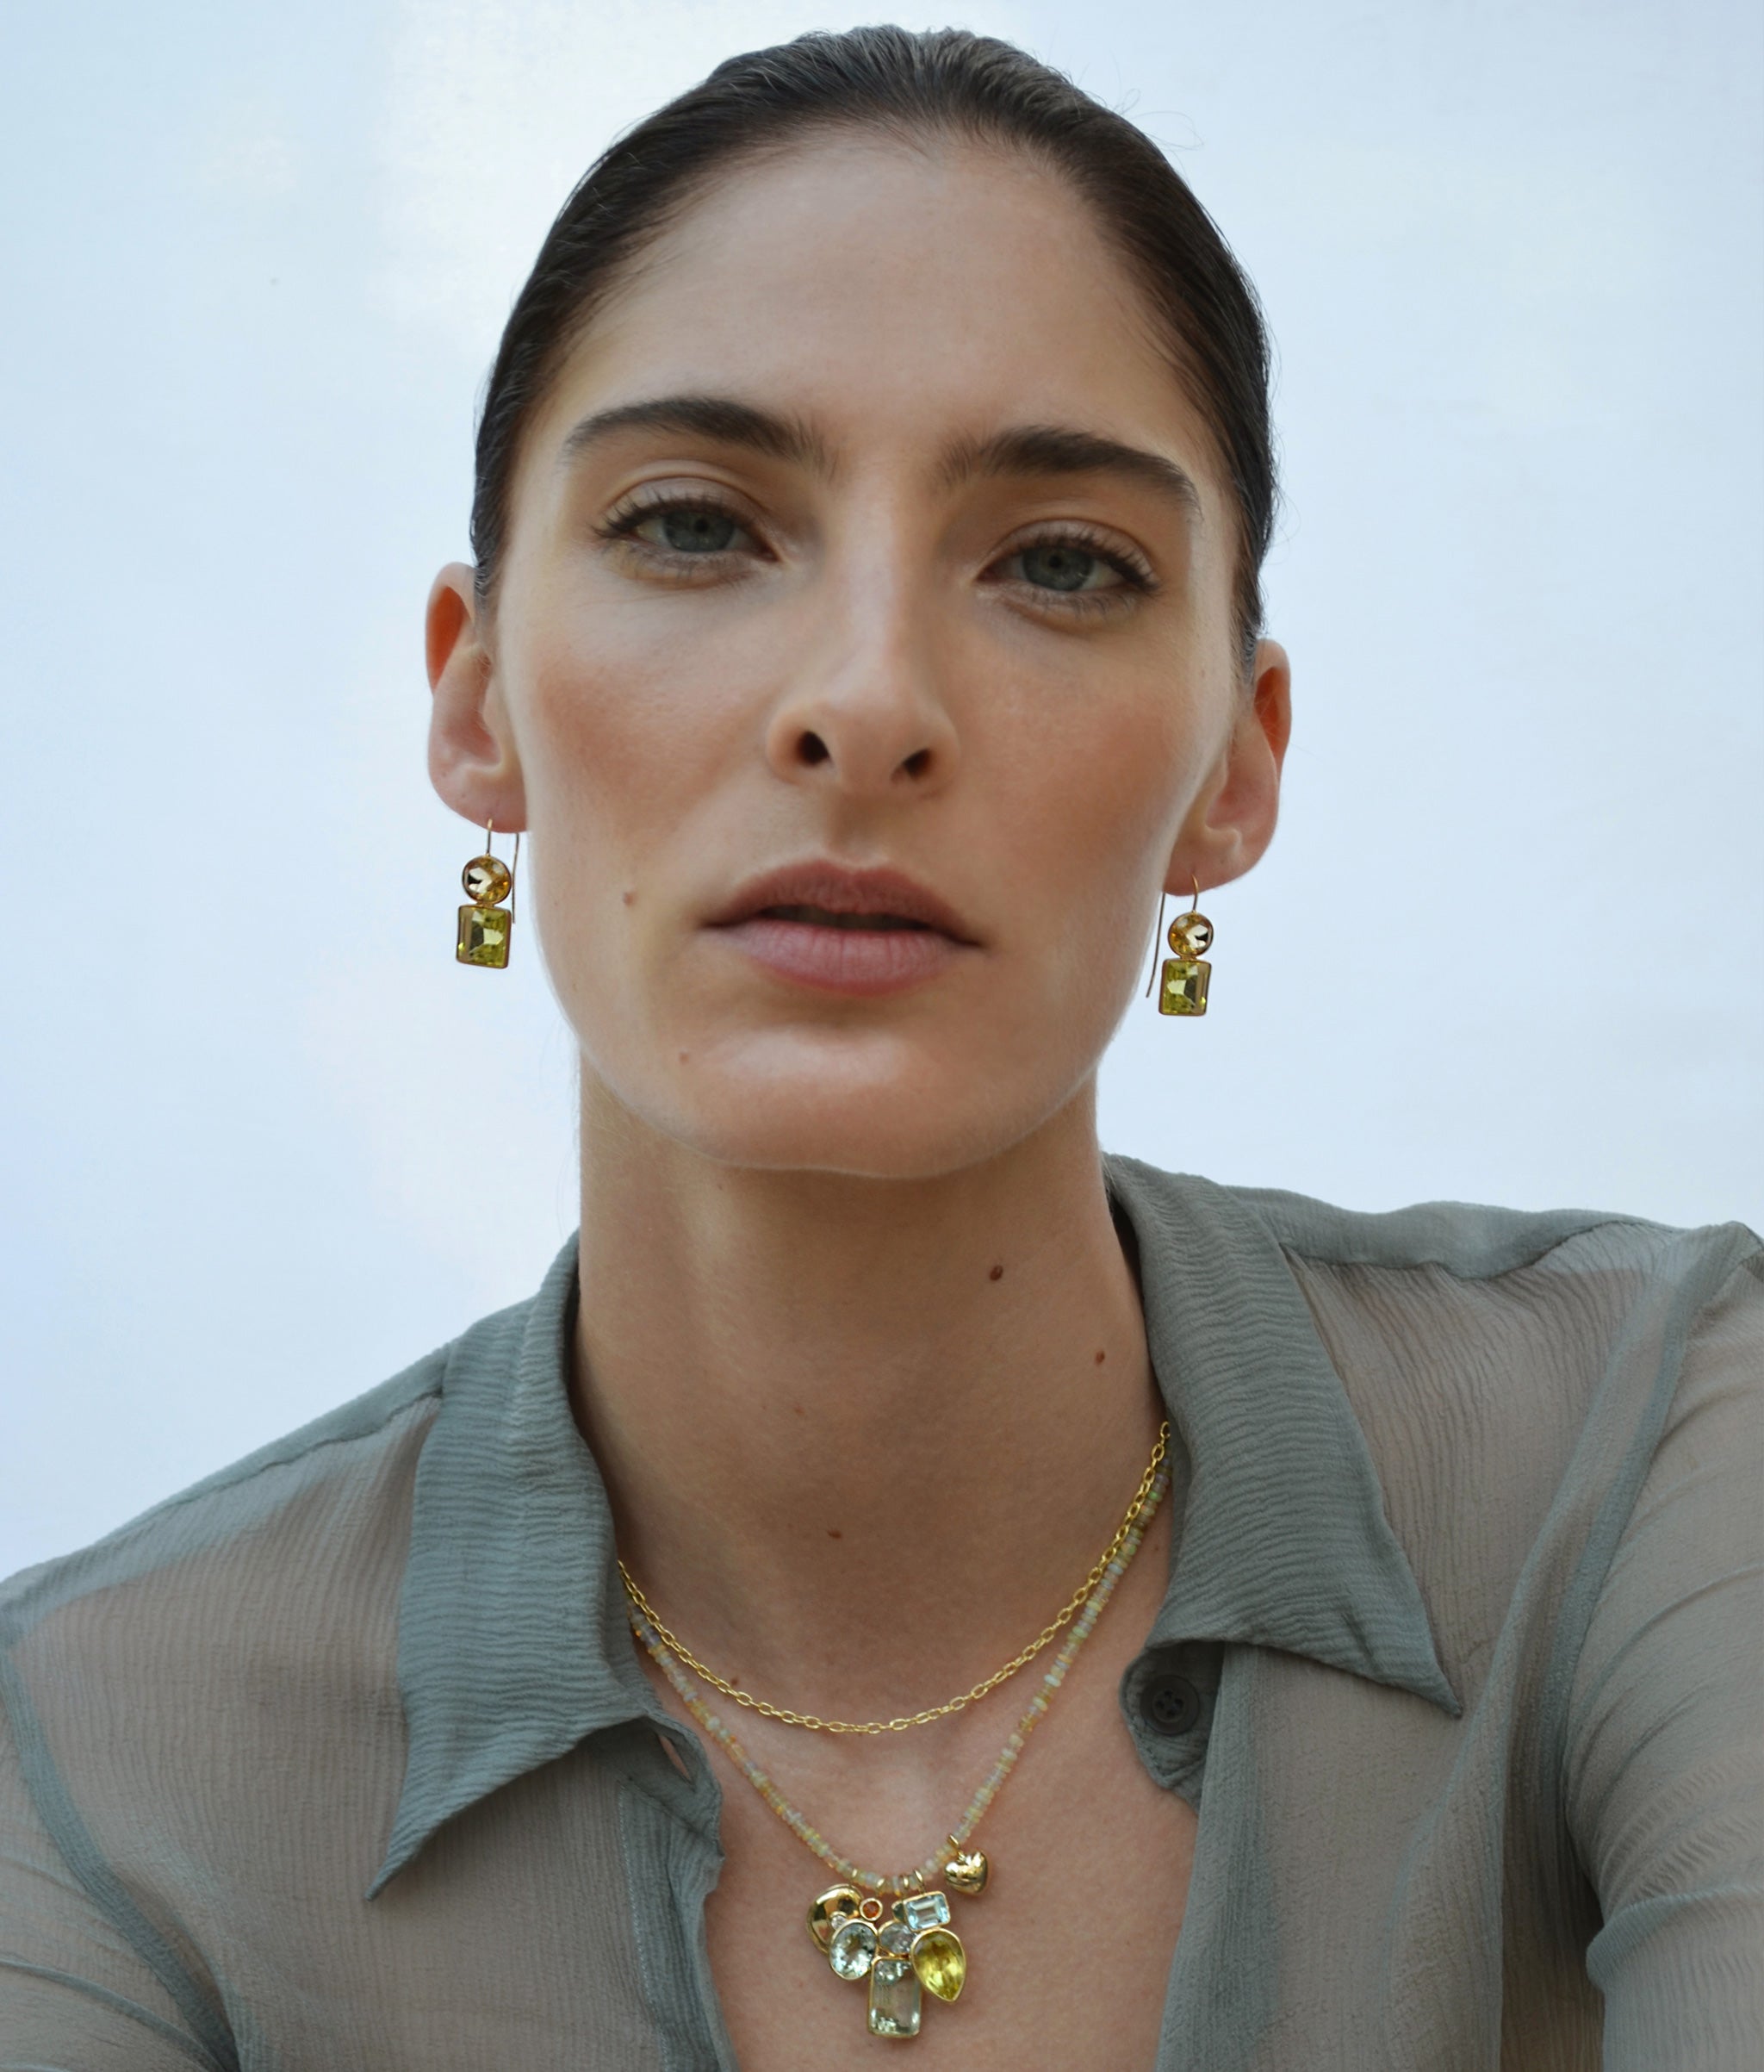 Model on blue backdrop wears gauzy top with Duo Earrings in Citrine and Lemon Quartz and beaded charm necklace